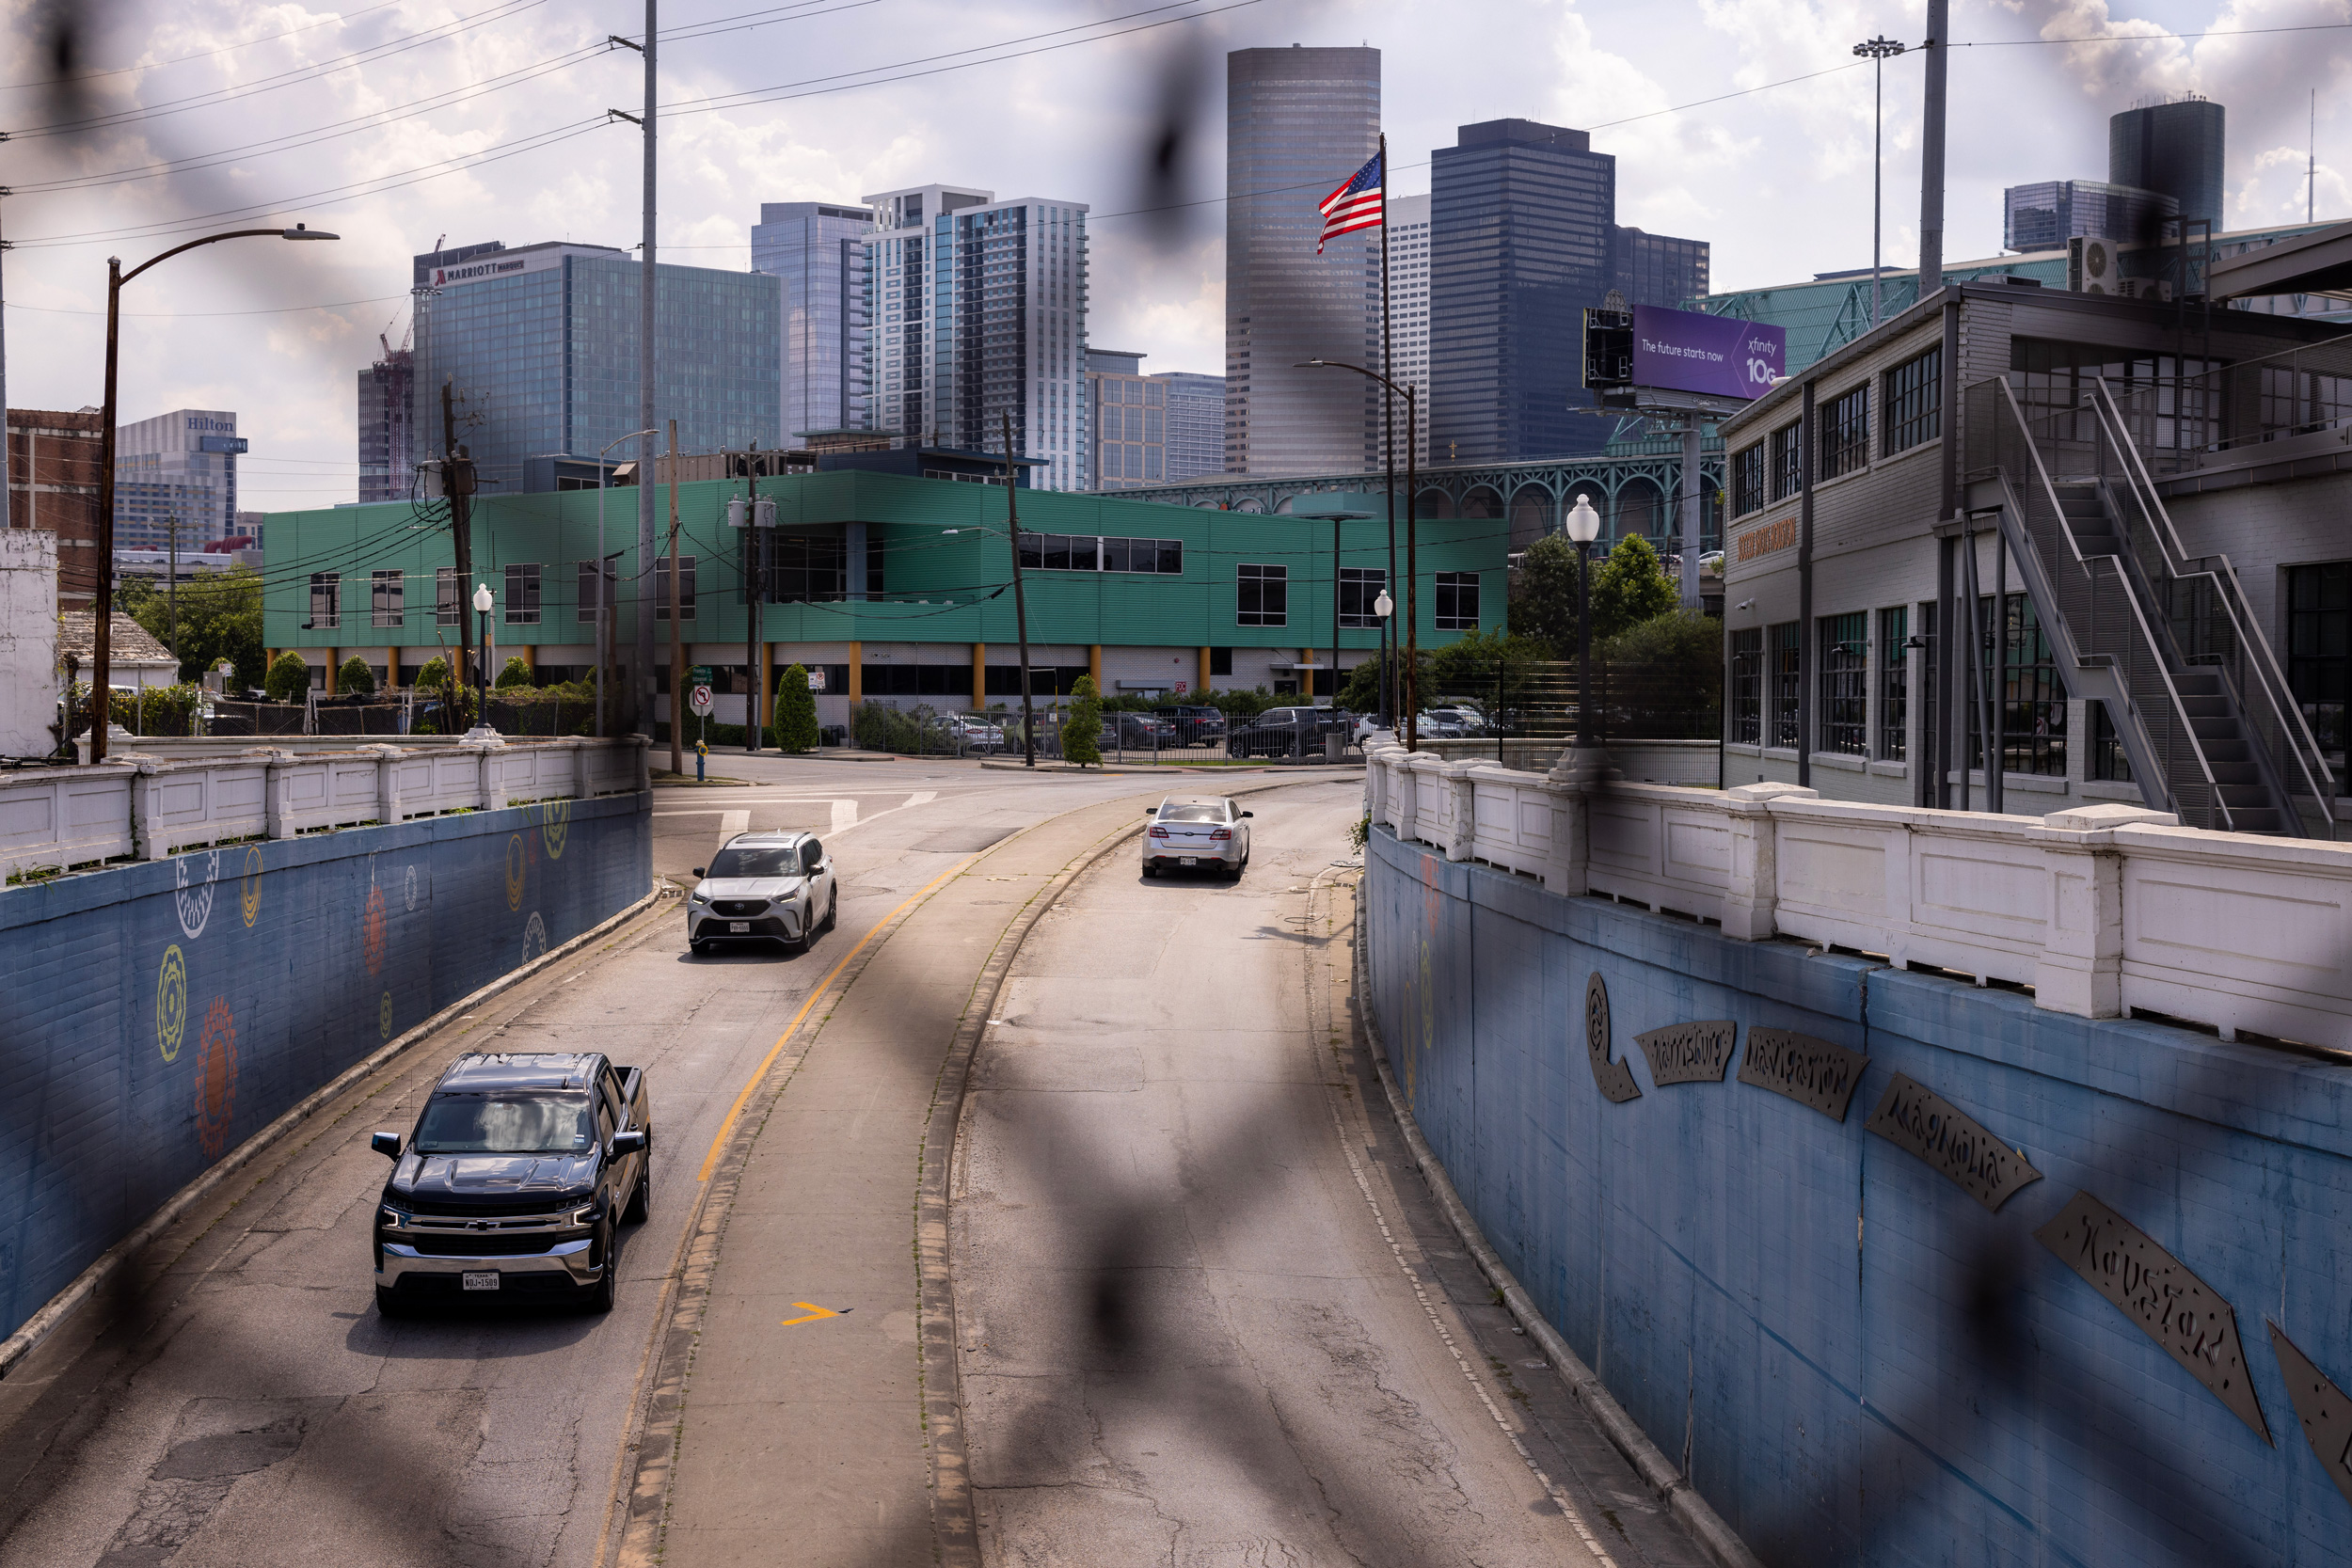 View of an underpass road in Houston